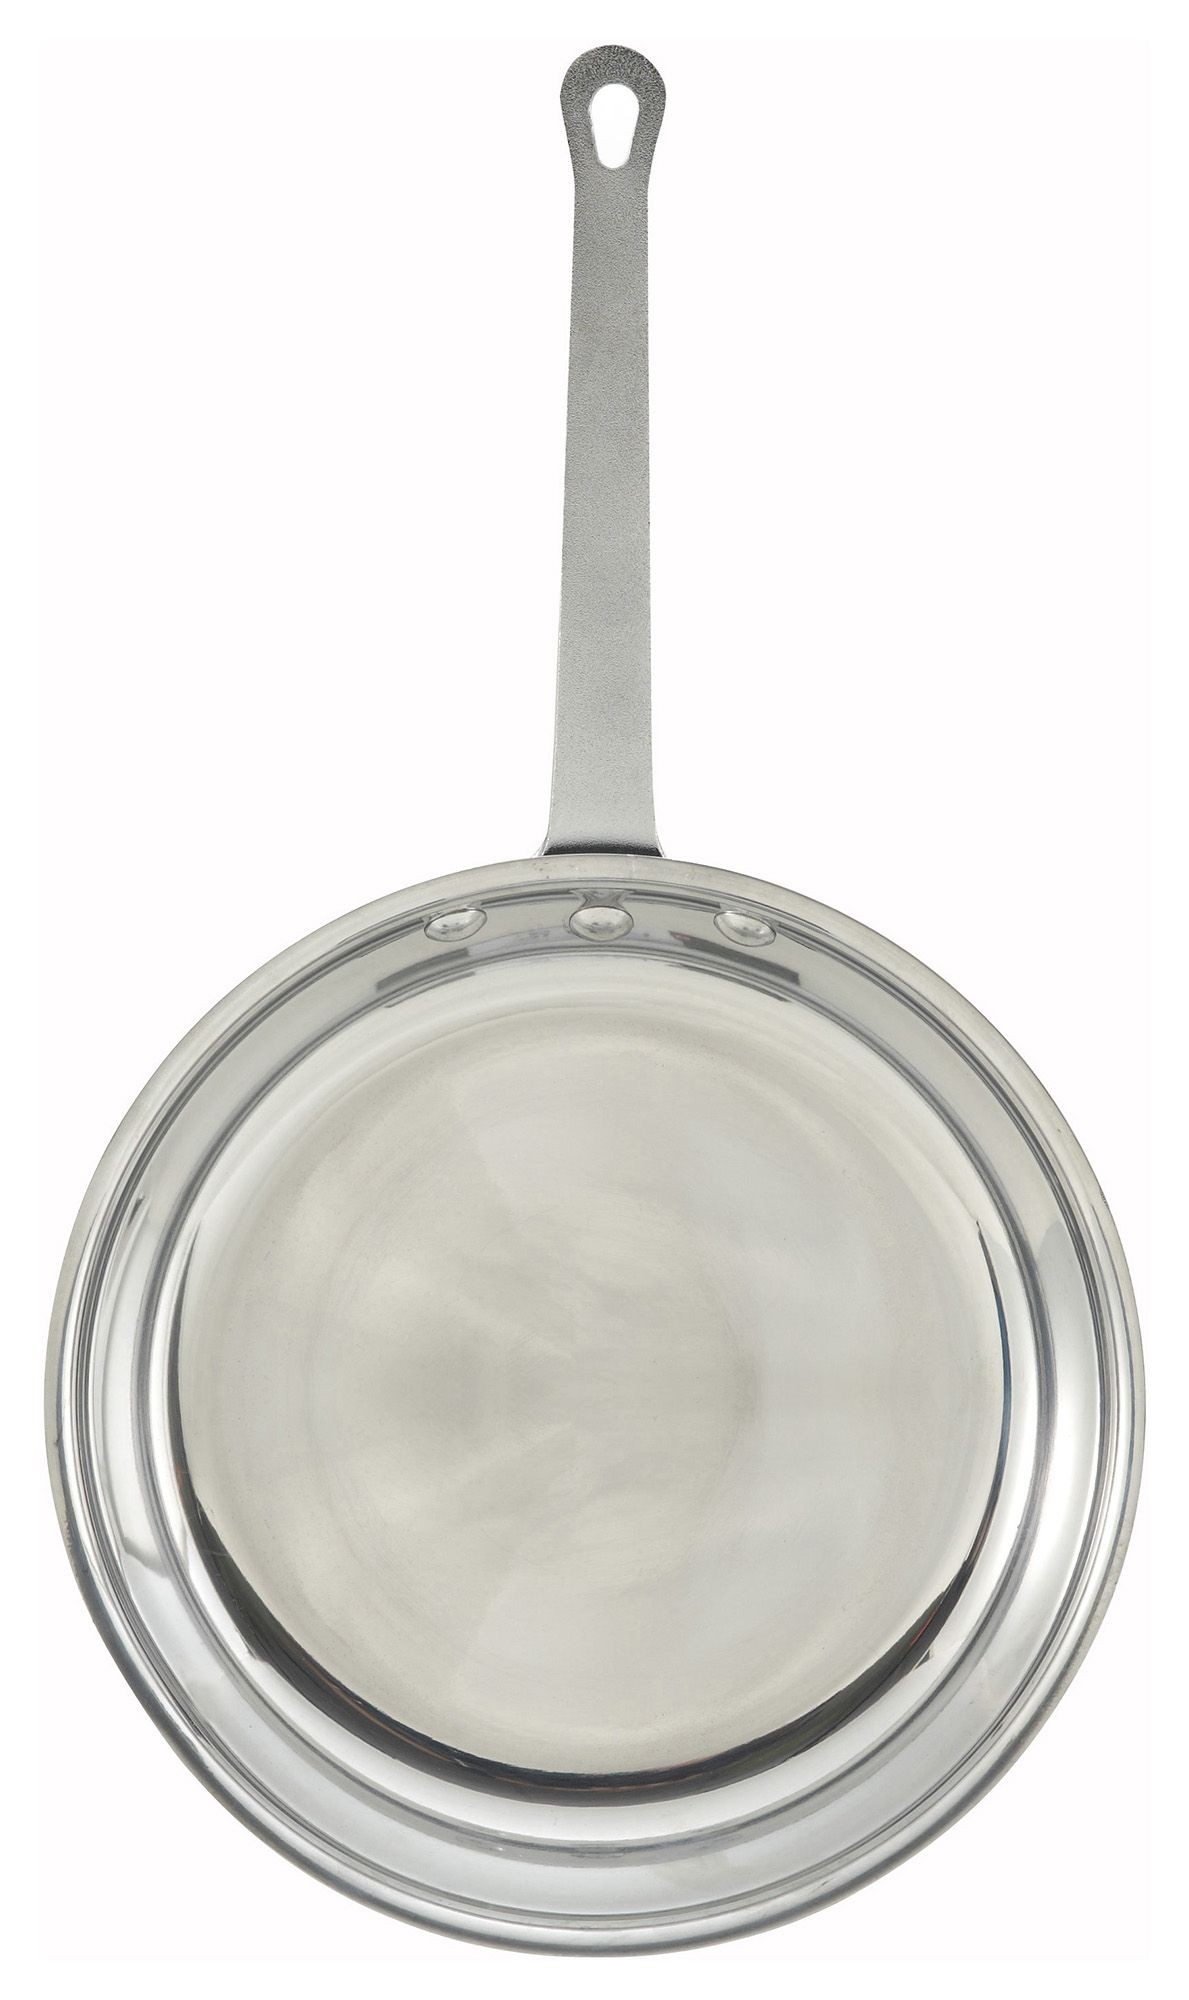 Winco AFP-8 8" Majestic Aluminum Fry Pan with Mirror Finish